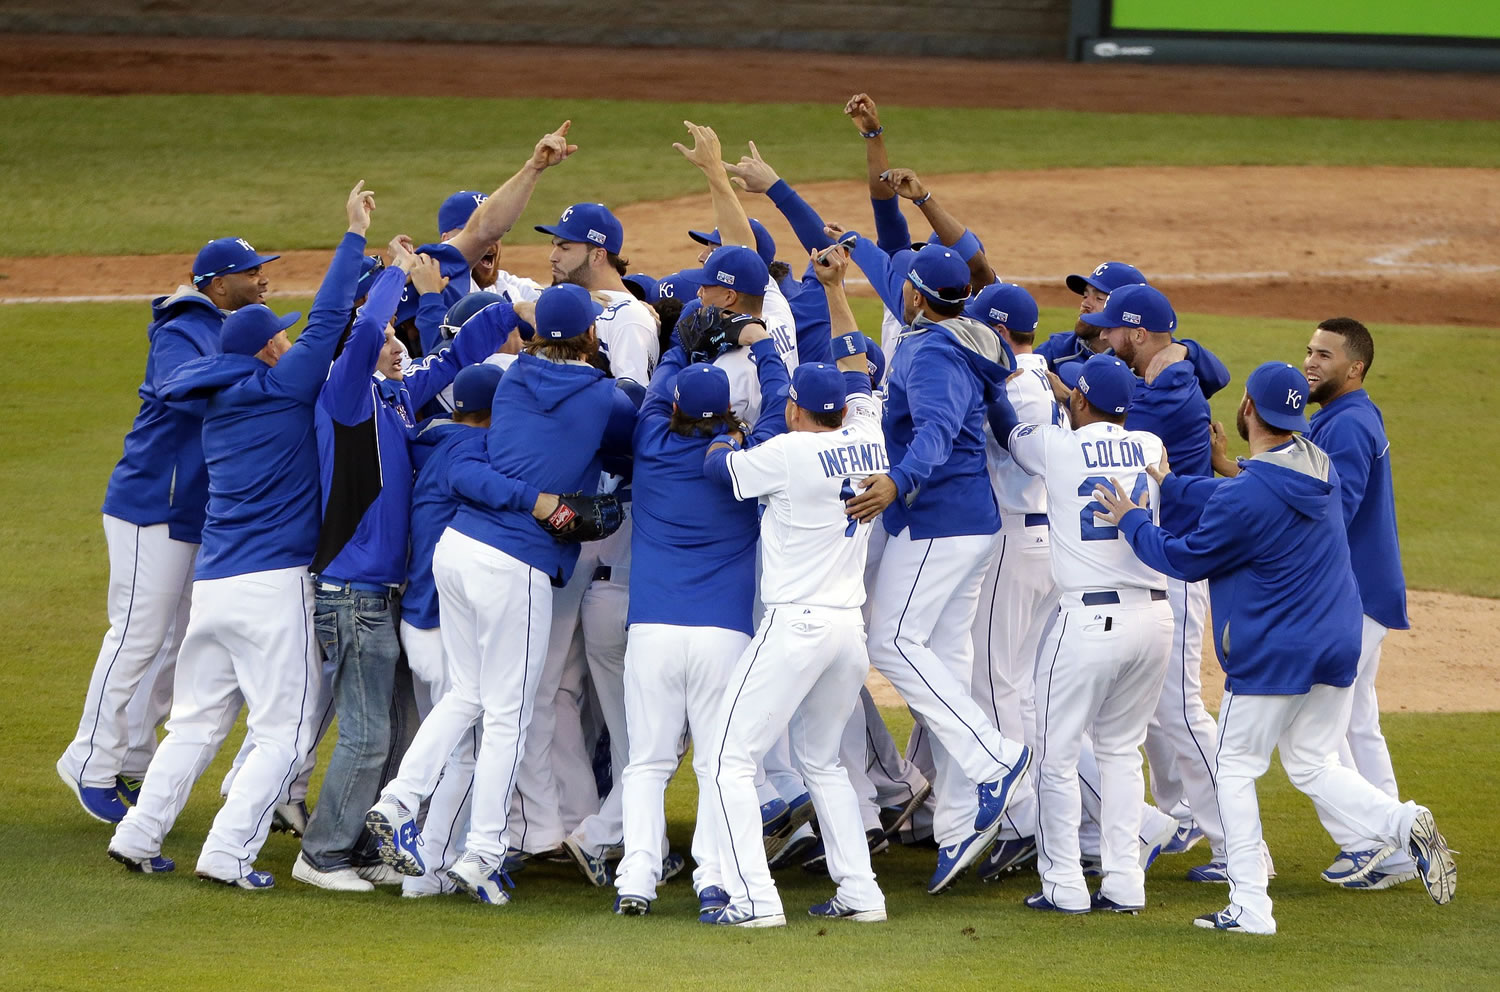 The Kansas City Royals players celebrate after the Royals defeated the Baltimore Orioles 2-1 in Game 4 of the American League Championship Series on Wednesday, Oct. 15, 2014, in Kansas City, Mo. The Royals advance to the World Series.